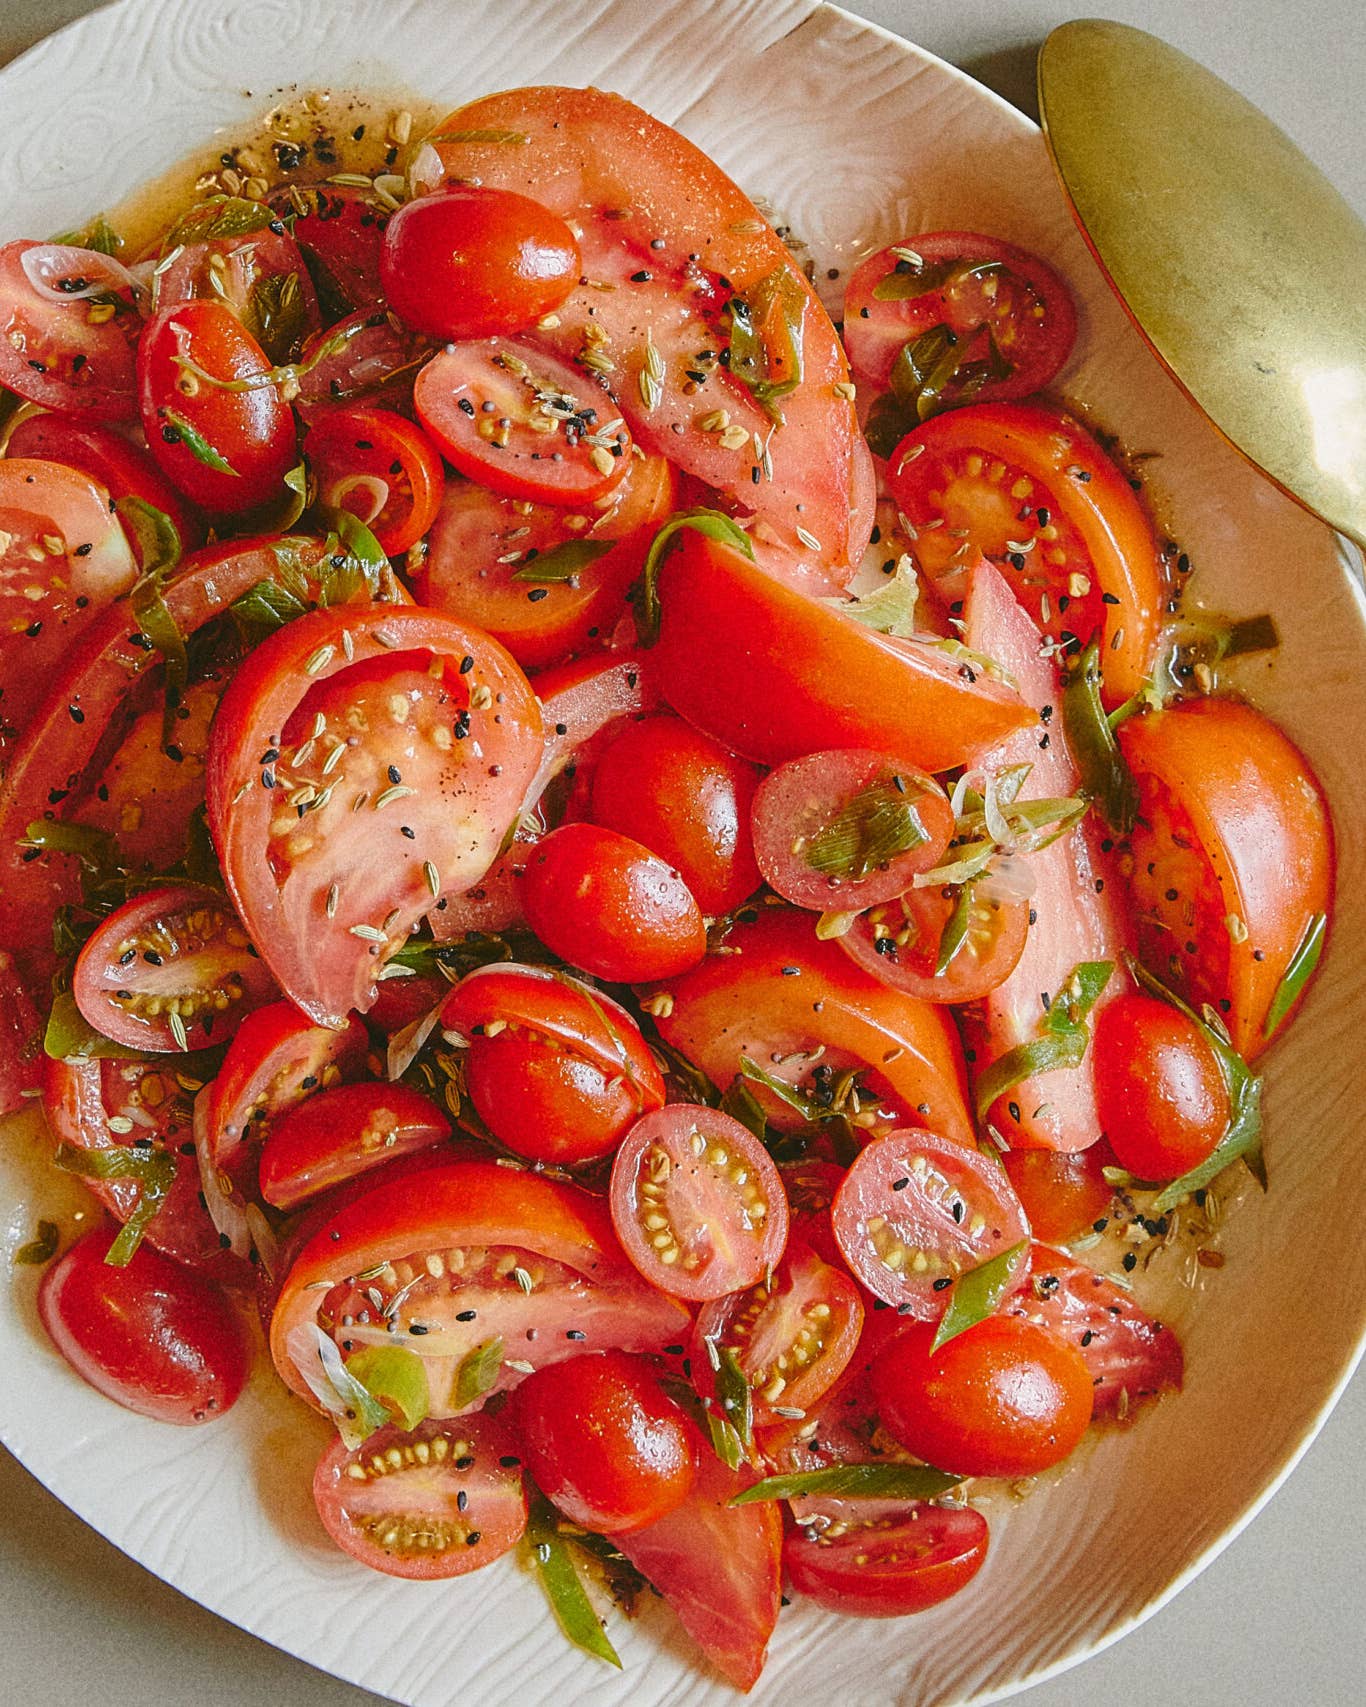 Tomato Salad with Scallions and Warm Brown Butter Vinaigrette